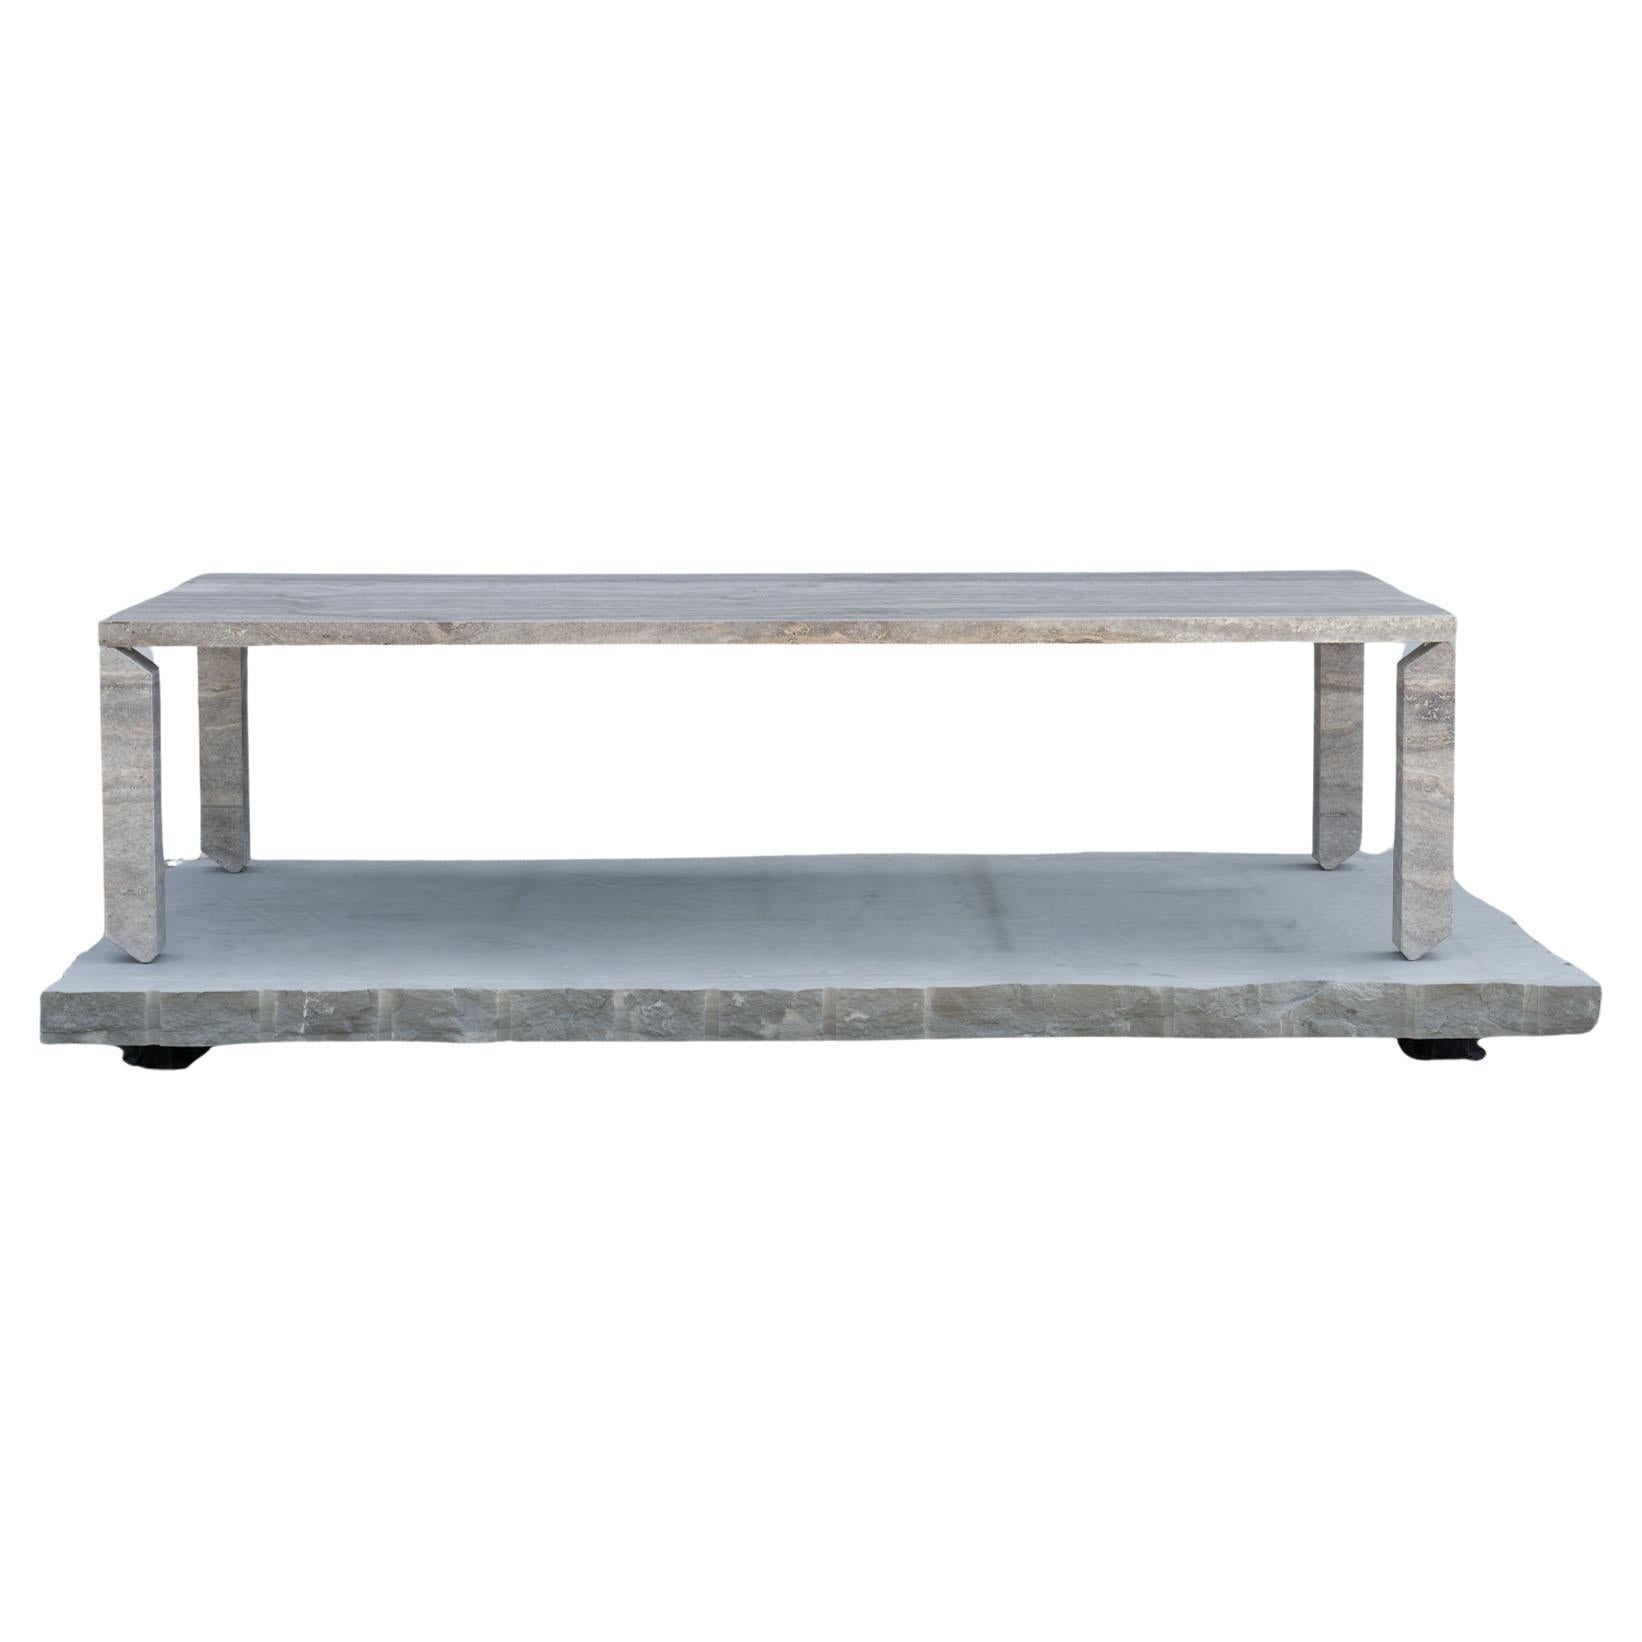 Tiptoe Outdoor Dining Table in Silver Travertine Marble by dAM Atelier